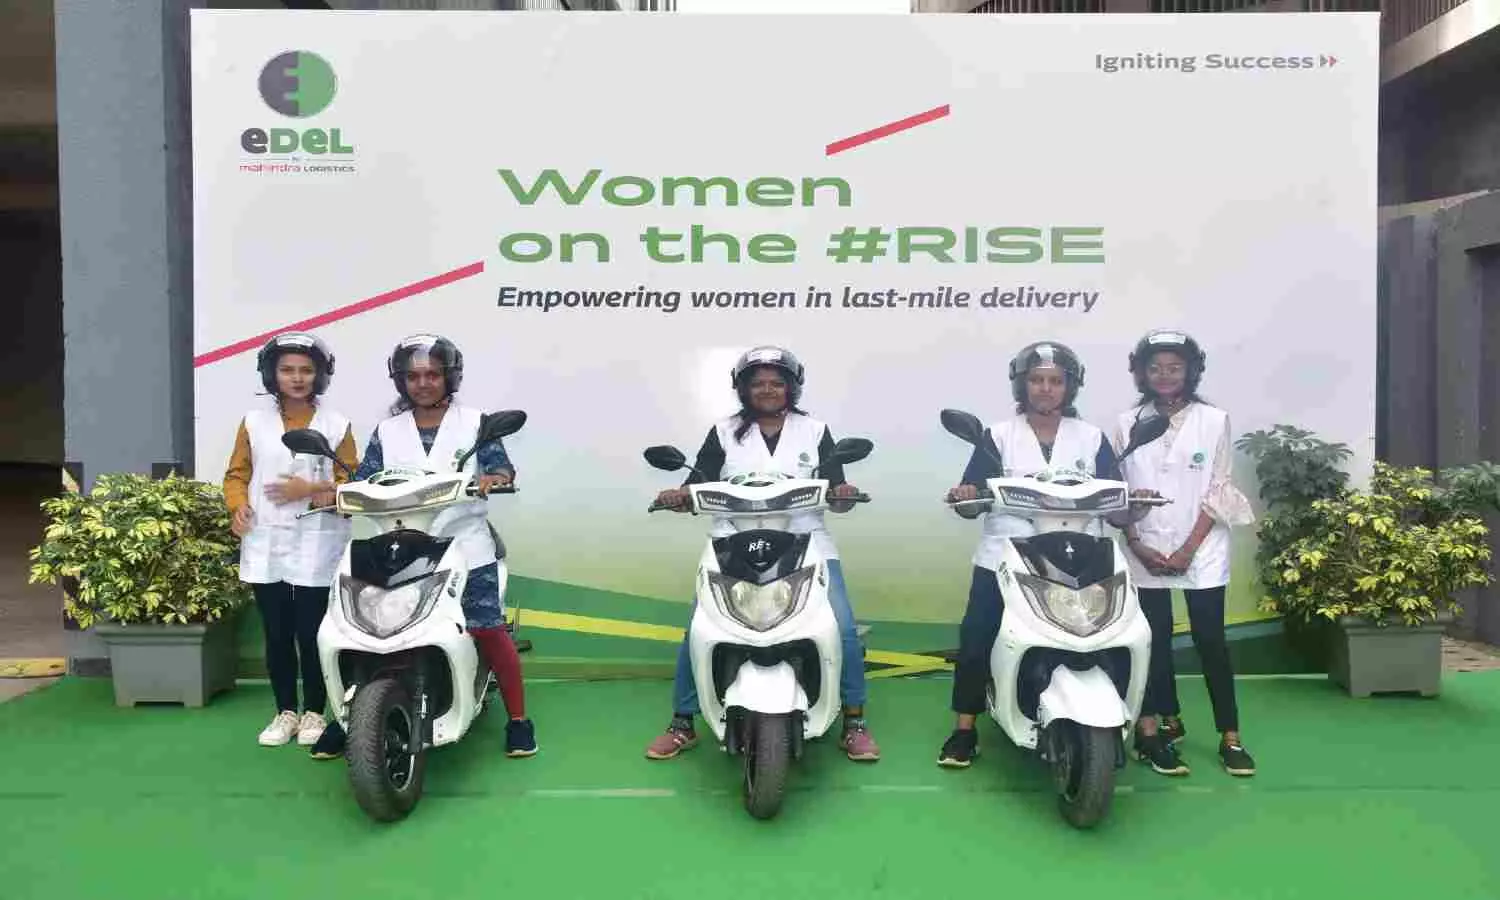 Mahindra Logistics appoints women e-bike riders for last-mile delivery